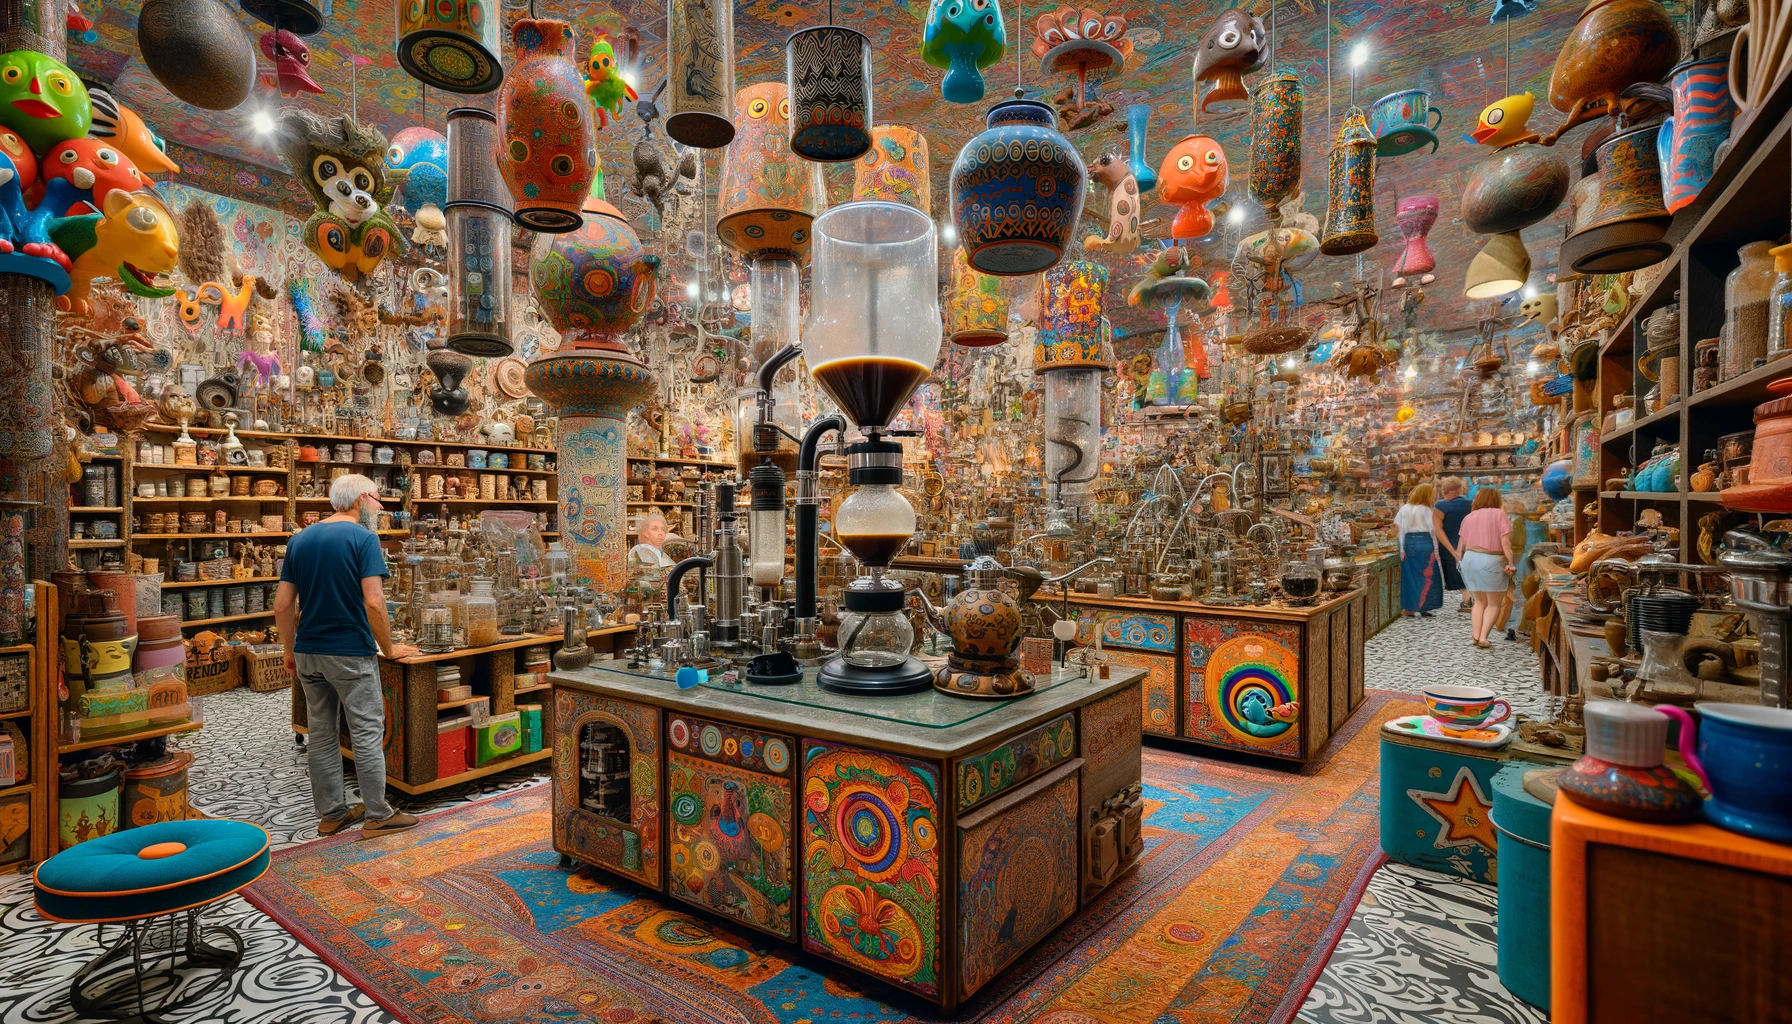 the quirky 'Wild World of Coffee Accessories' store. The store is an imaginative and colorful bazaar